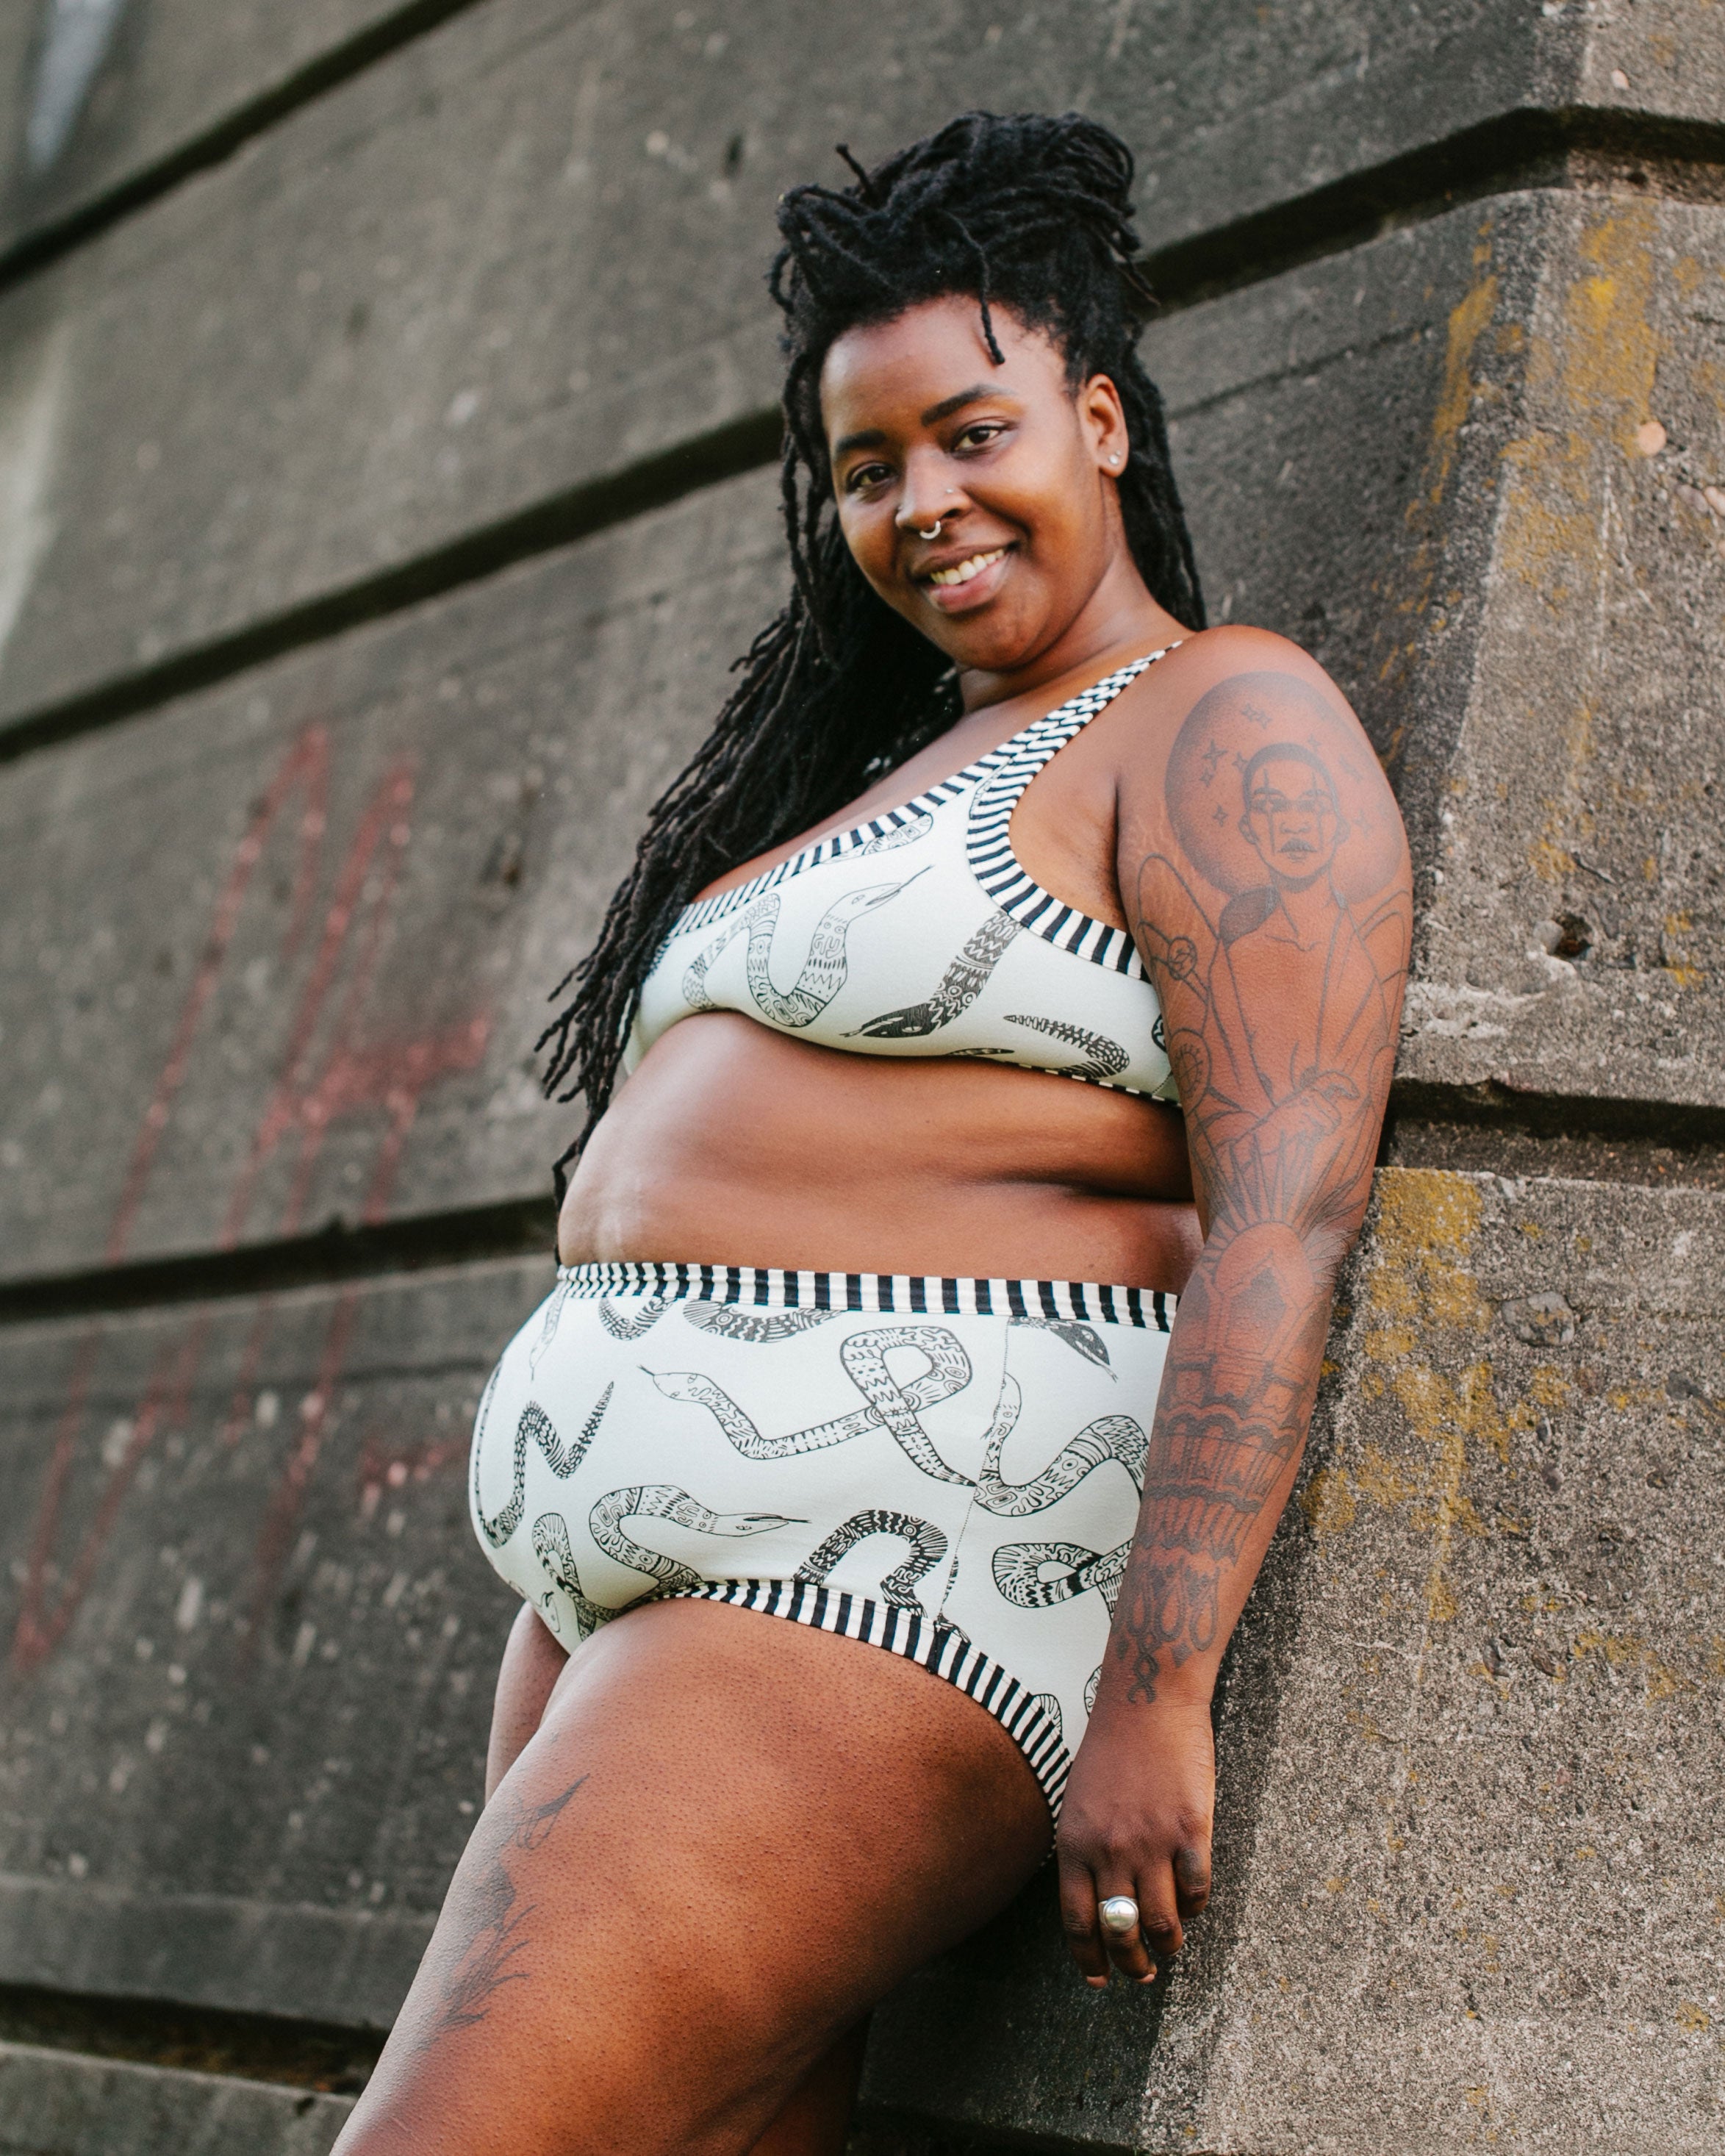 Model smiling outside wearing Thunderpants organic cotton Original style underwear and Bralette in our Sketchy Snakes print: sage color with black sketched snakes and black and white stripe binding.